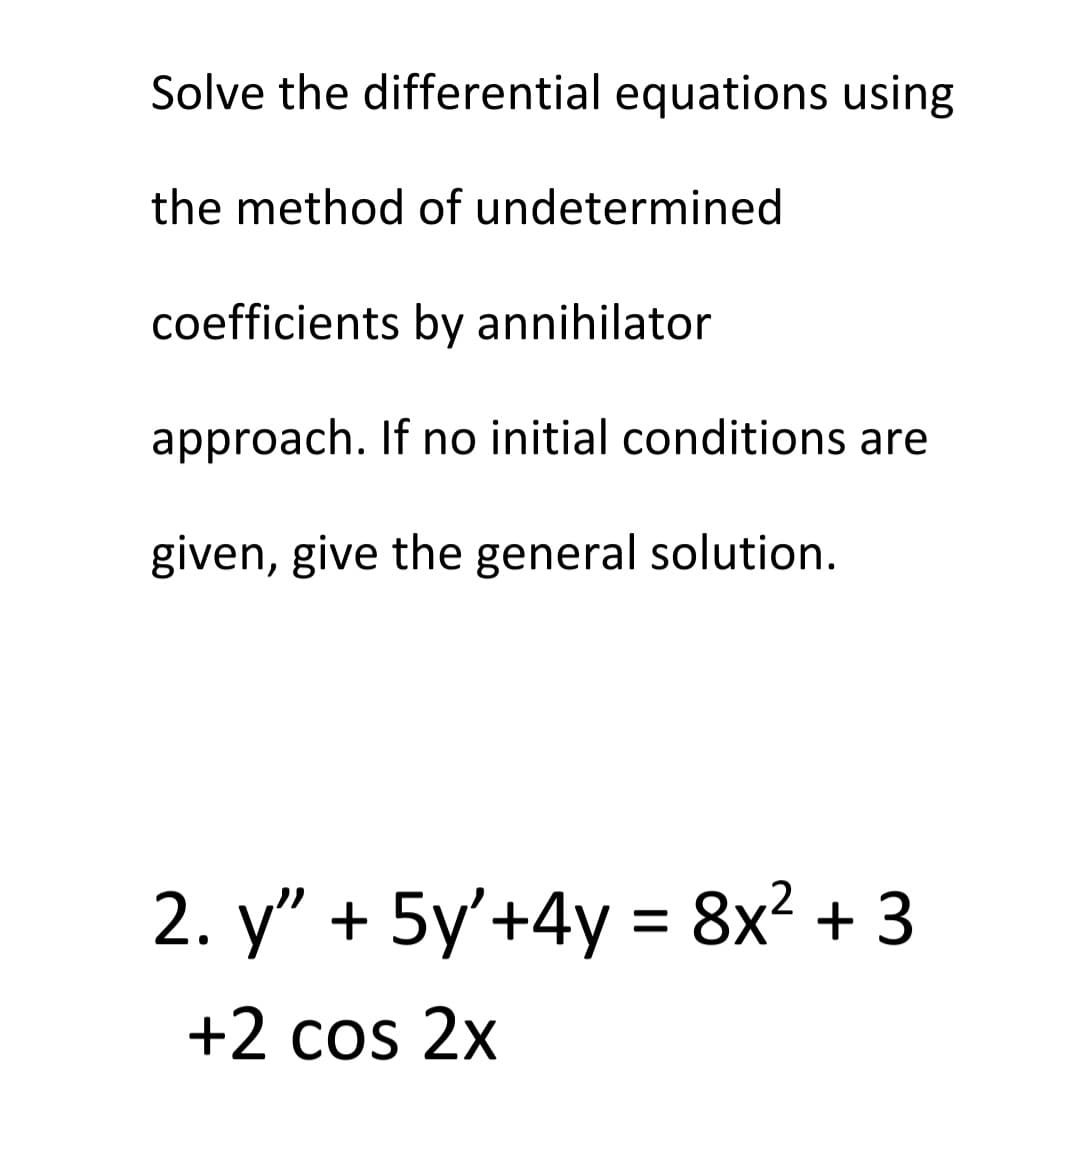 Solve the differential equations using
the method of undetermined
coefficients by annihilator
approach. If no initial conditions are
given, give the general solution.
2. y" + 5y'+4y = 8x² + 3
+2 cos 2x
